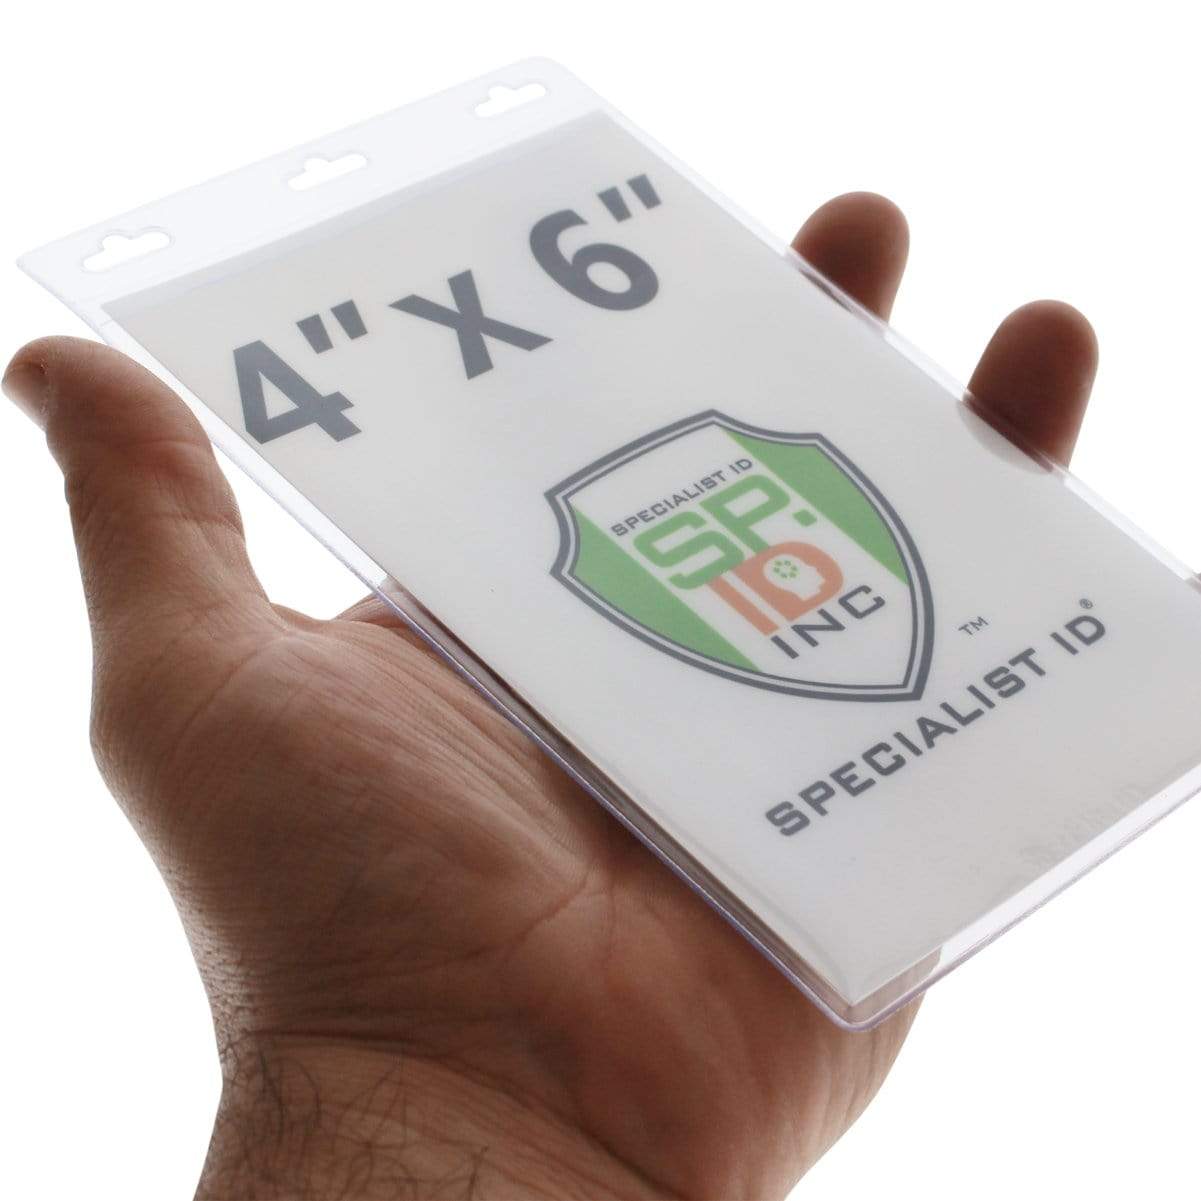 A hand holding a clear plastic holder with a paper insert displaying text "4"" x 6"" and a logo with "SP" on a shield. The text "SPECIALIST ID" is printed at the bottom of the insert, making it ideal for those needing special size credential holders or Vertical Oversized 4X6 Vinyl ID Badge Holder (XL46V).